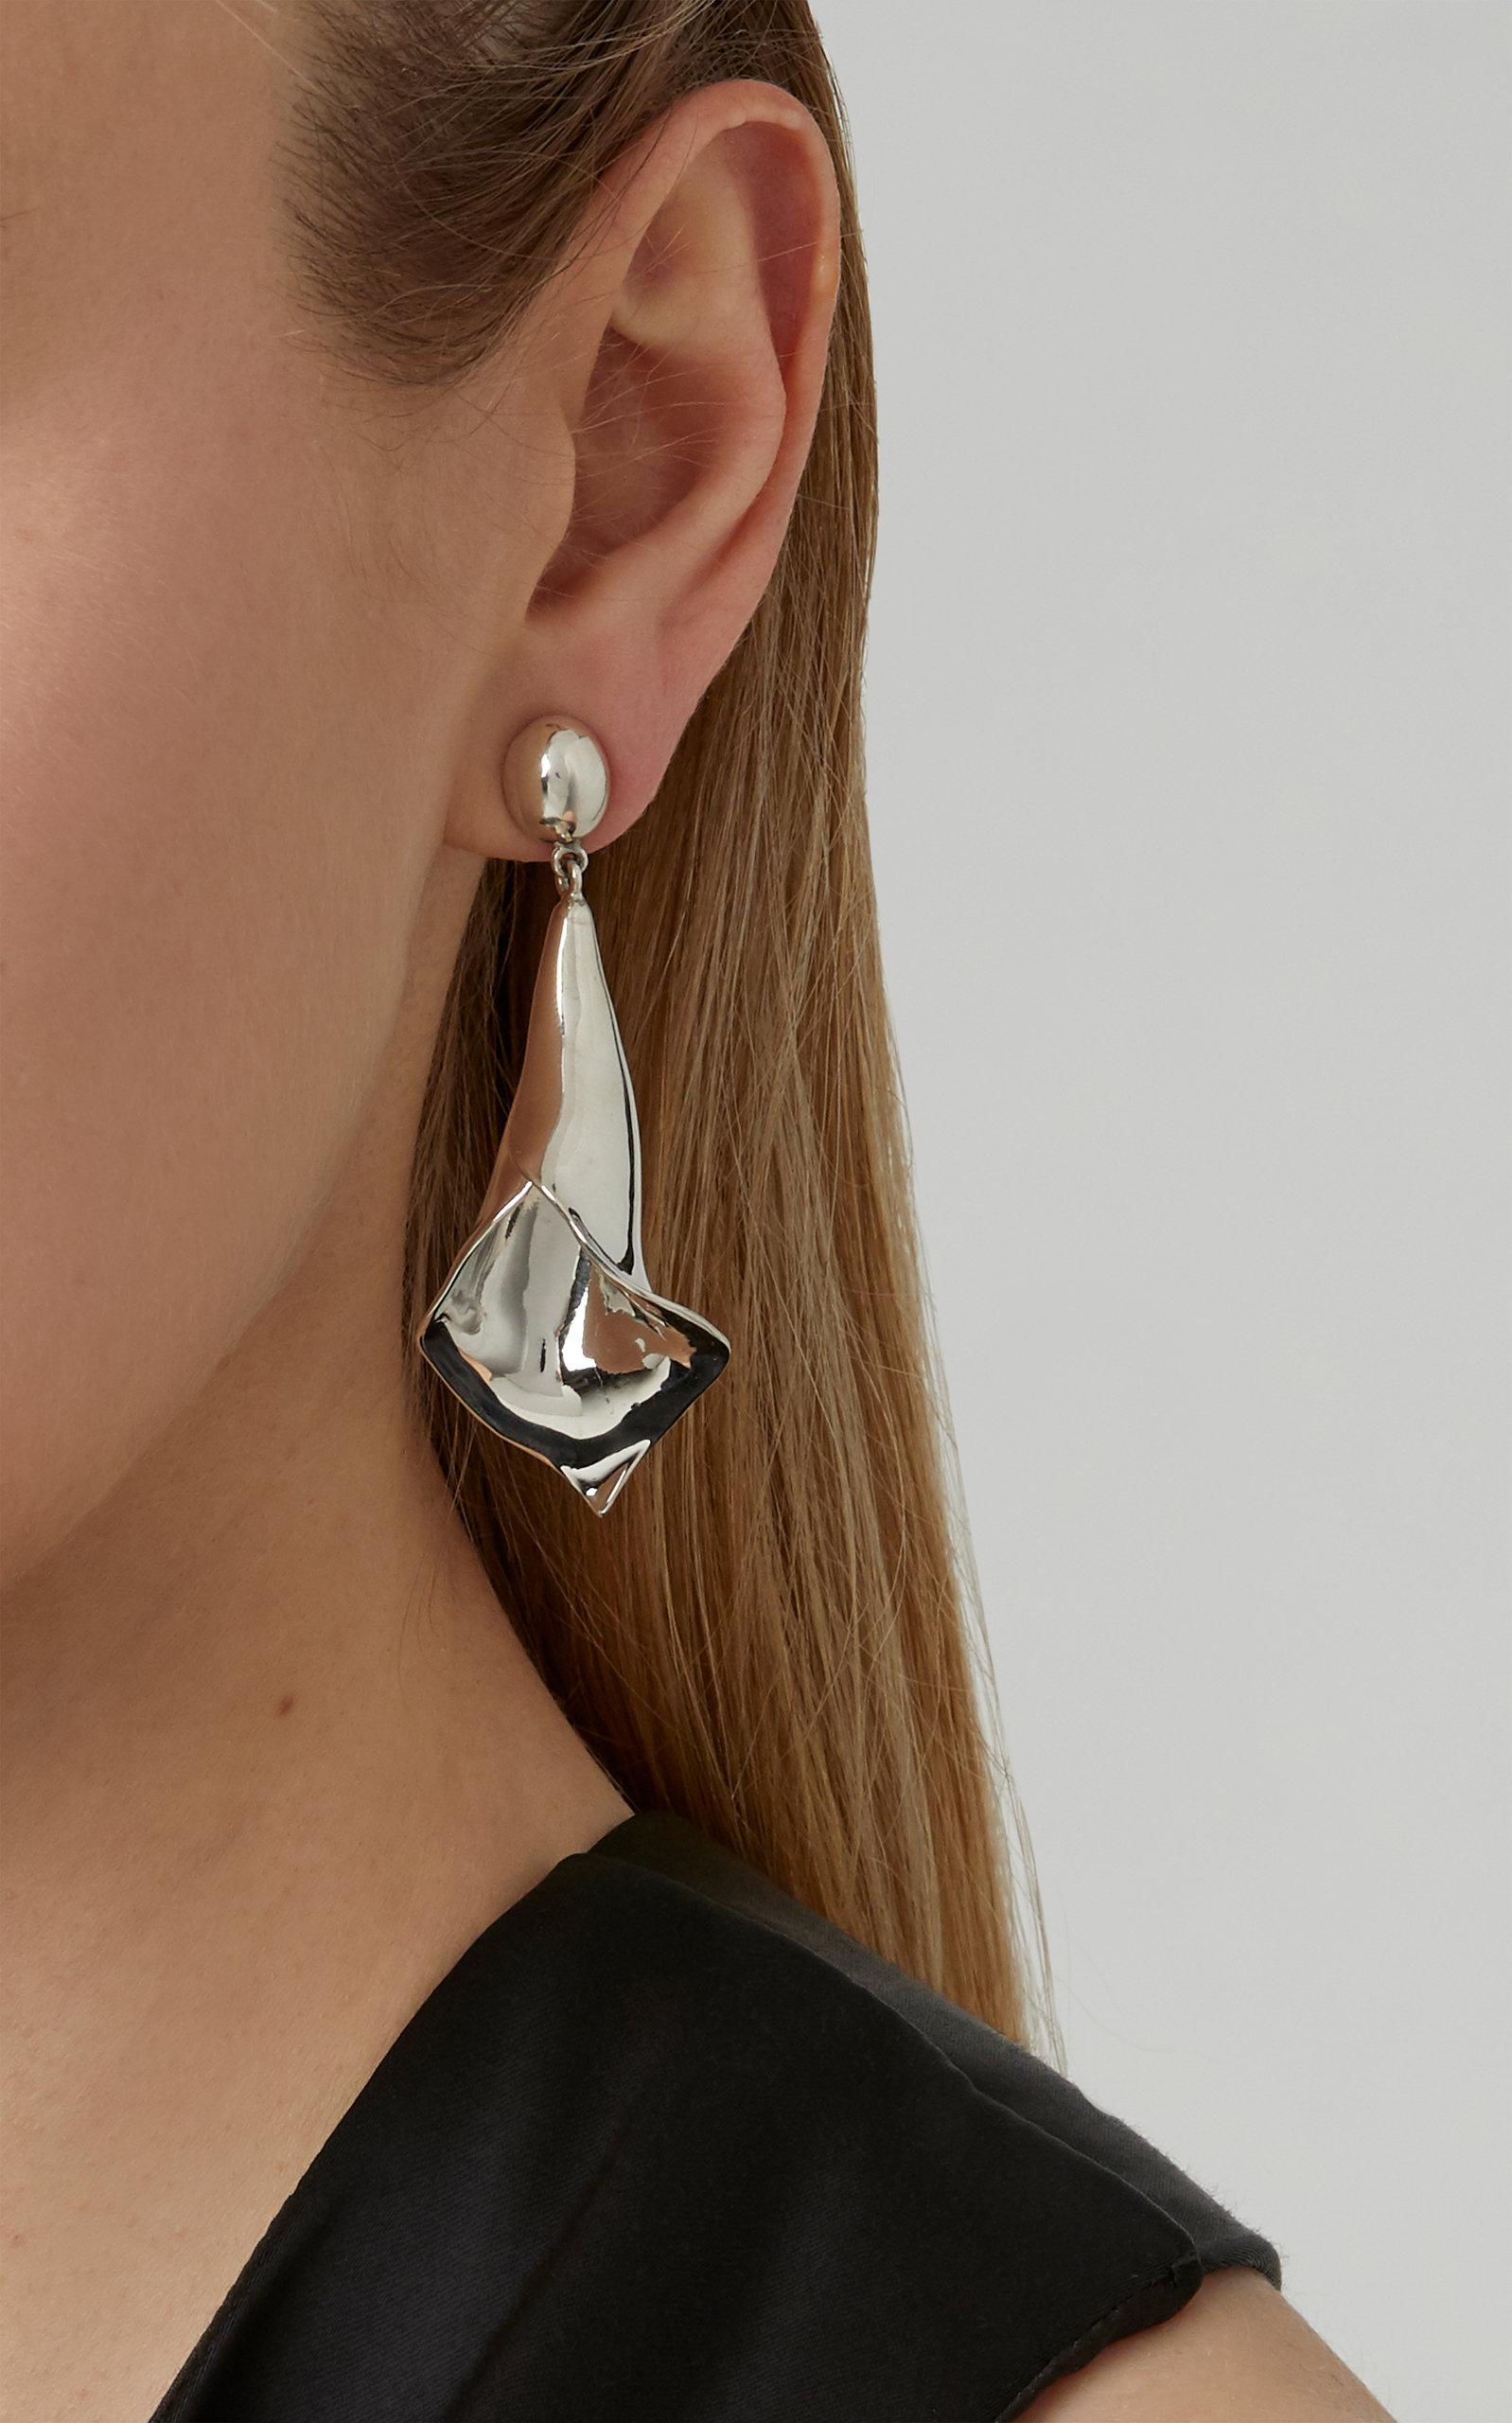 AGMES Sterling Silver Statement Calla Lily Dangle Drop Earrings.
Sterling Silver post.
Handmade in New York City.
Inspired by urban landscapes, architecture and modern art, the collection creates a feminine geometry expressed through clean lines and